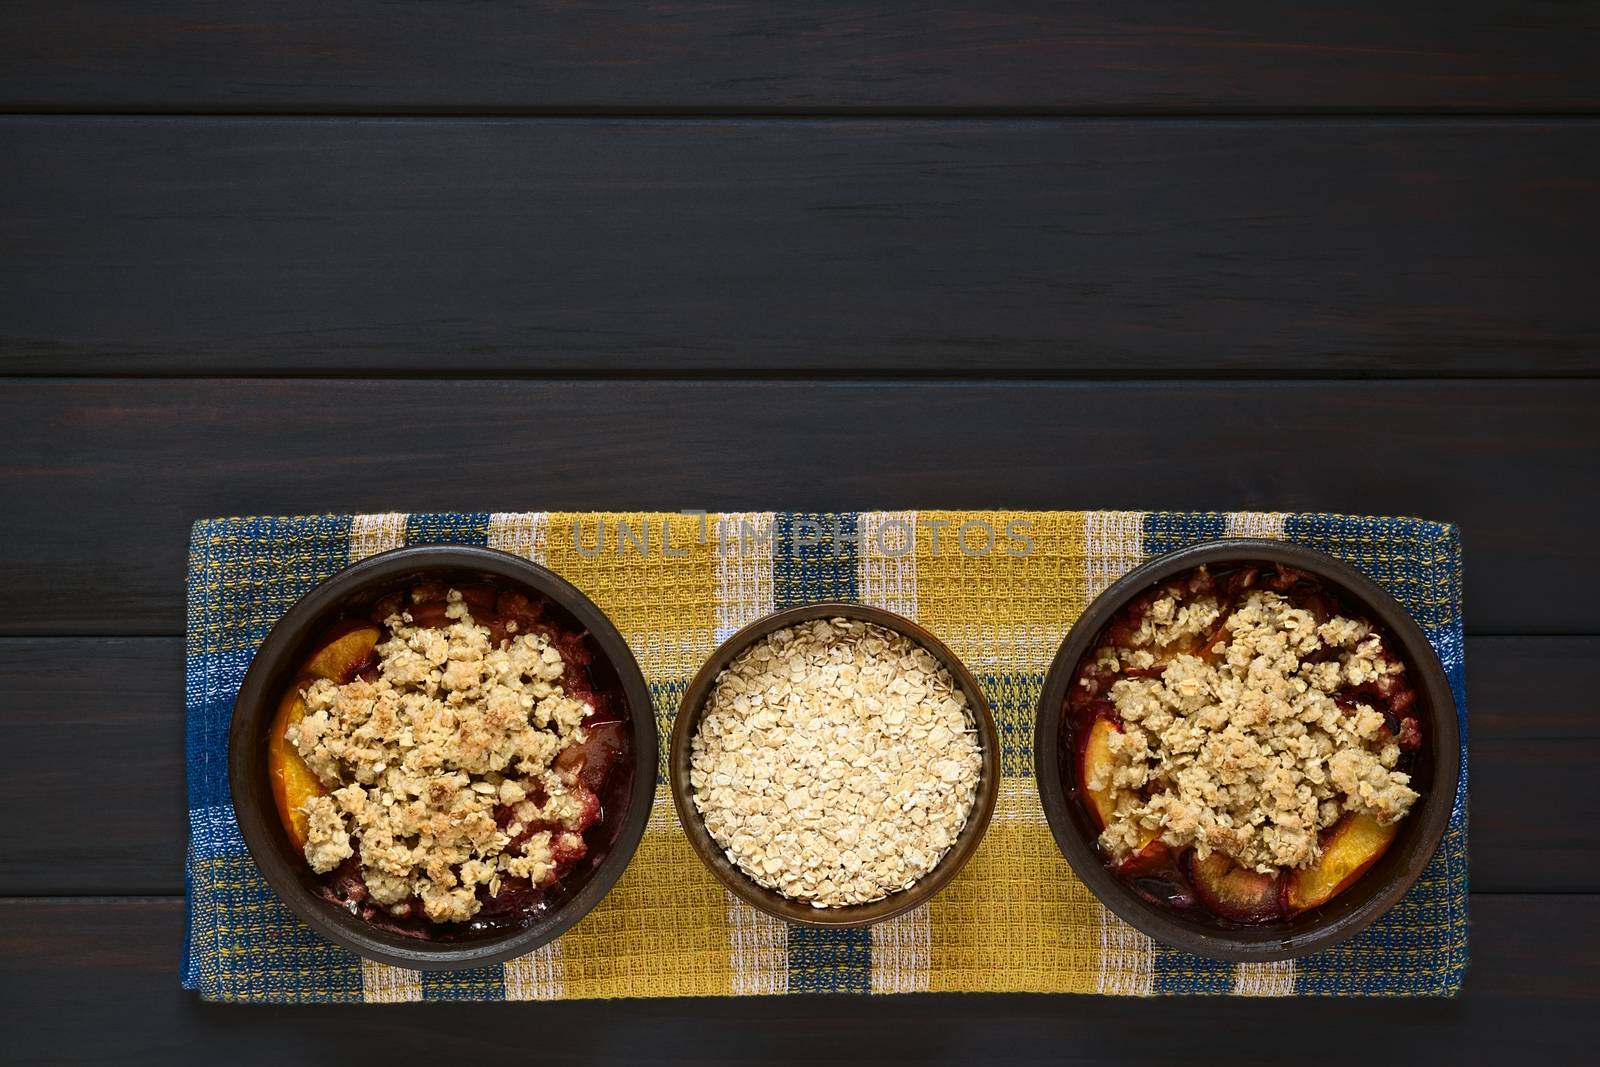 Overhead shot of two rustic bowls filled with baked plum and nectarine crumble or crisp and a bowl of rolled oats, photographed on cloth on dark wood with natural light